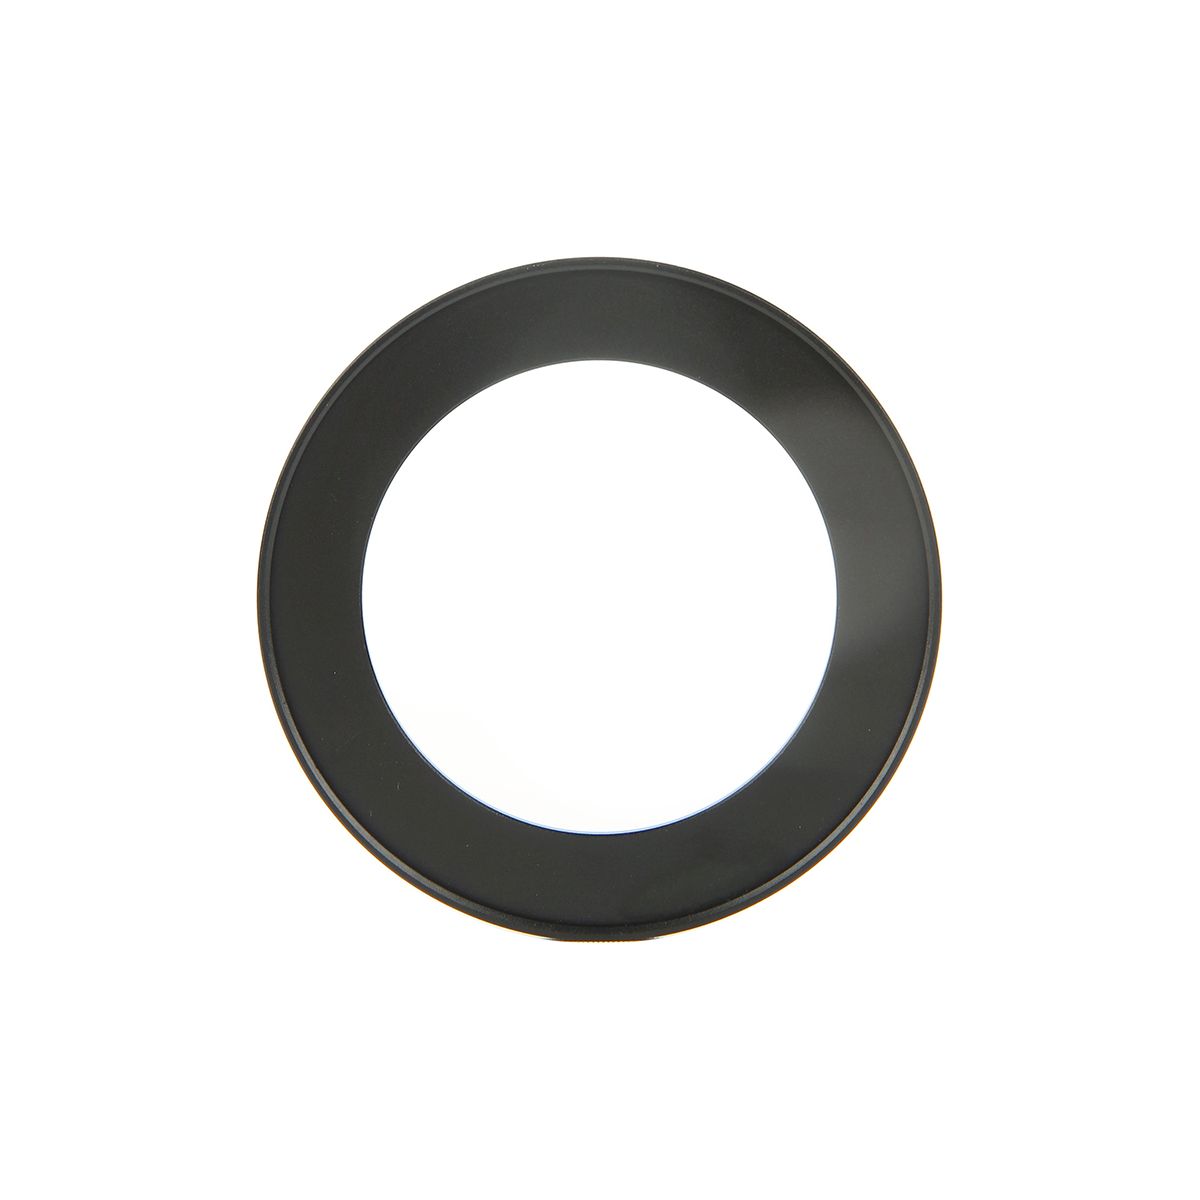 Caruba Step-up/down Ring 37mm - 30.5mm